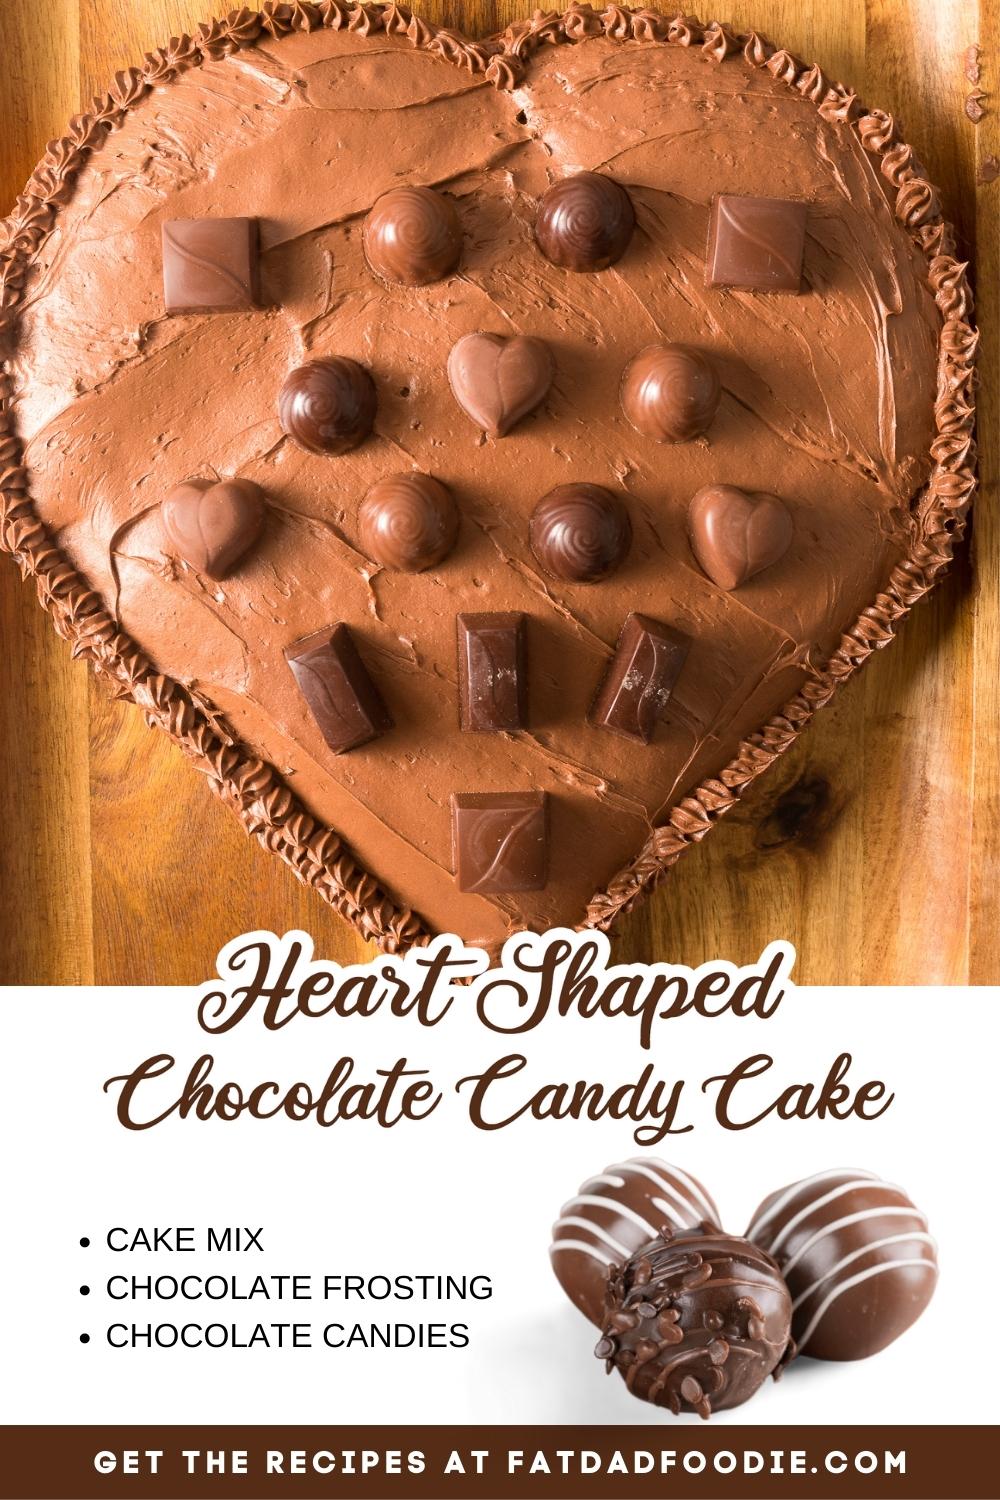 heart shaped chocolate candy cake ingredients list